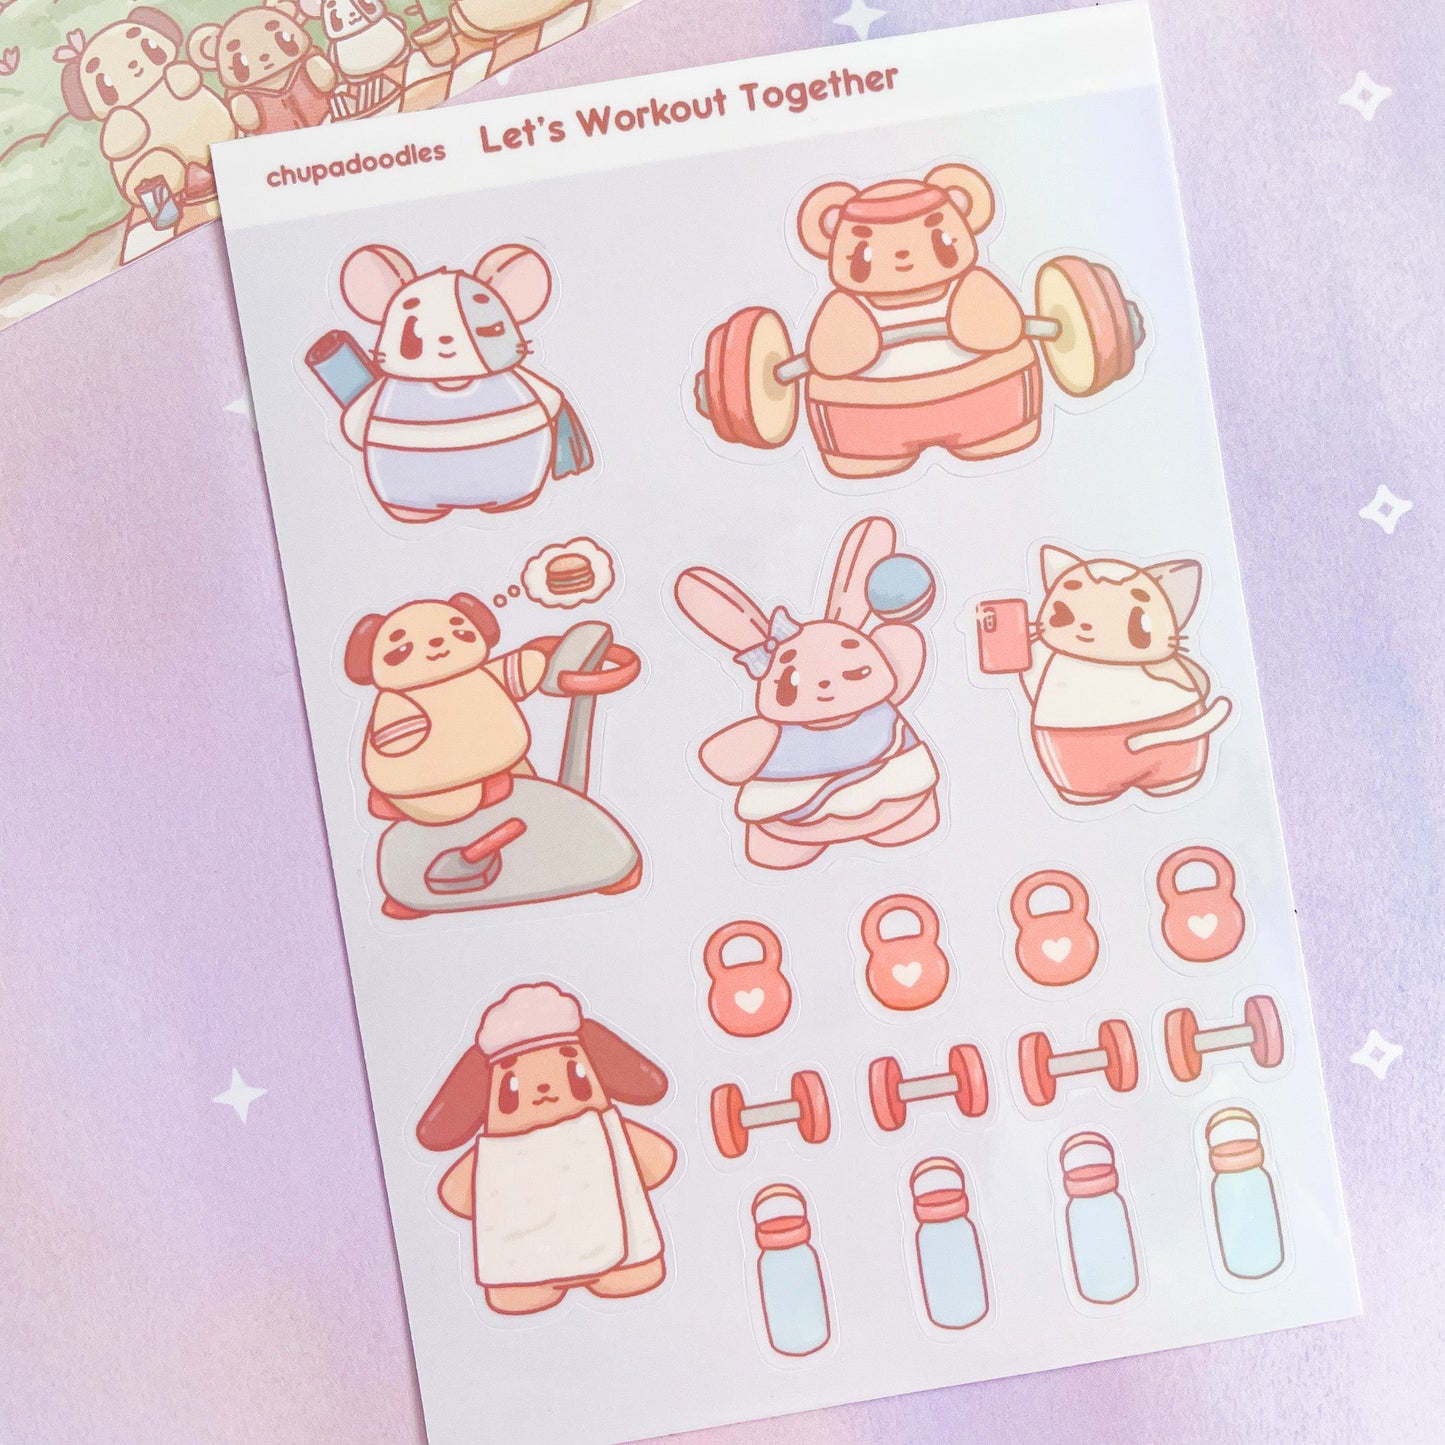 Workout With Chupadoodles Holo Sticker Sheet